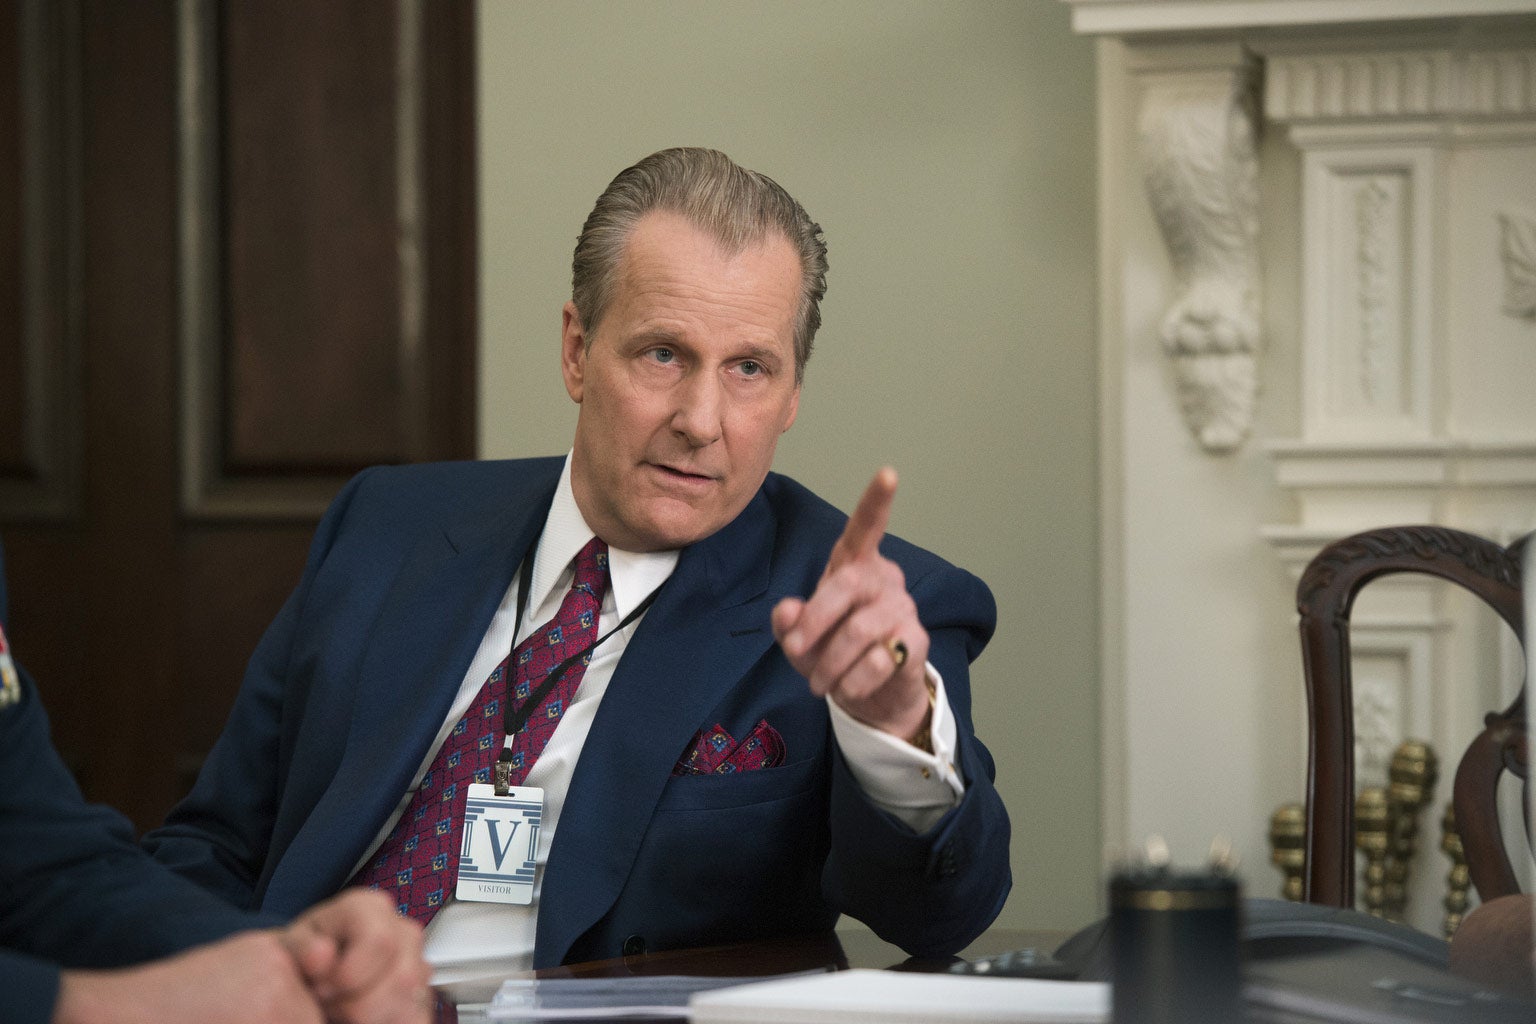 Jeff Daniels as FBI agent John O’Neill in a still image from The Looming Tower.